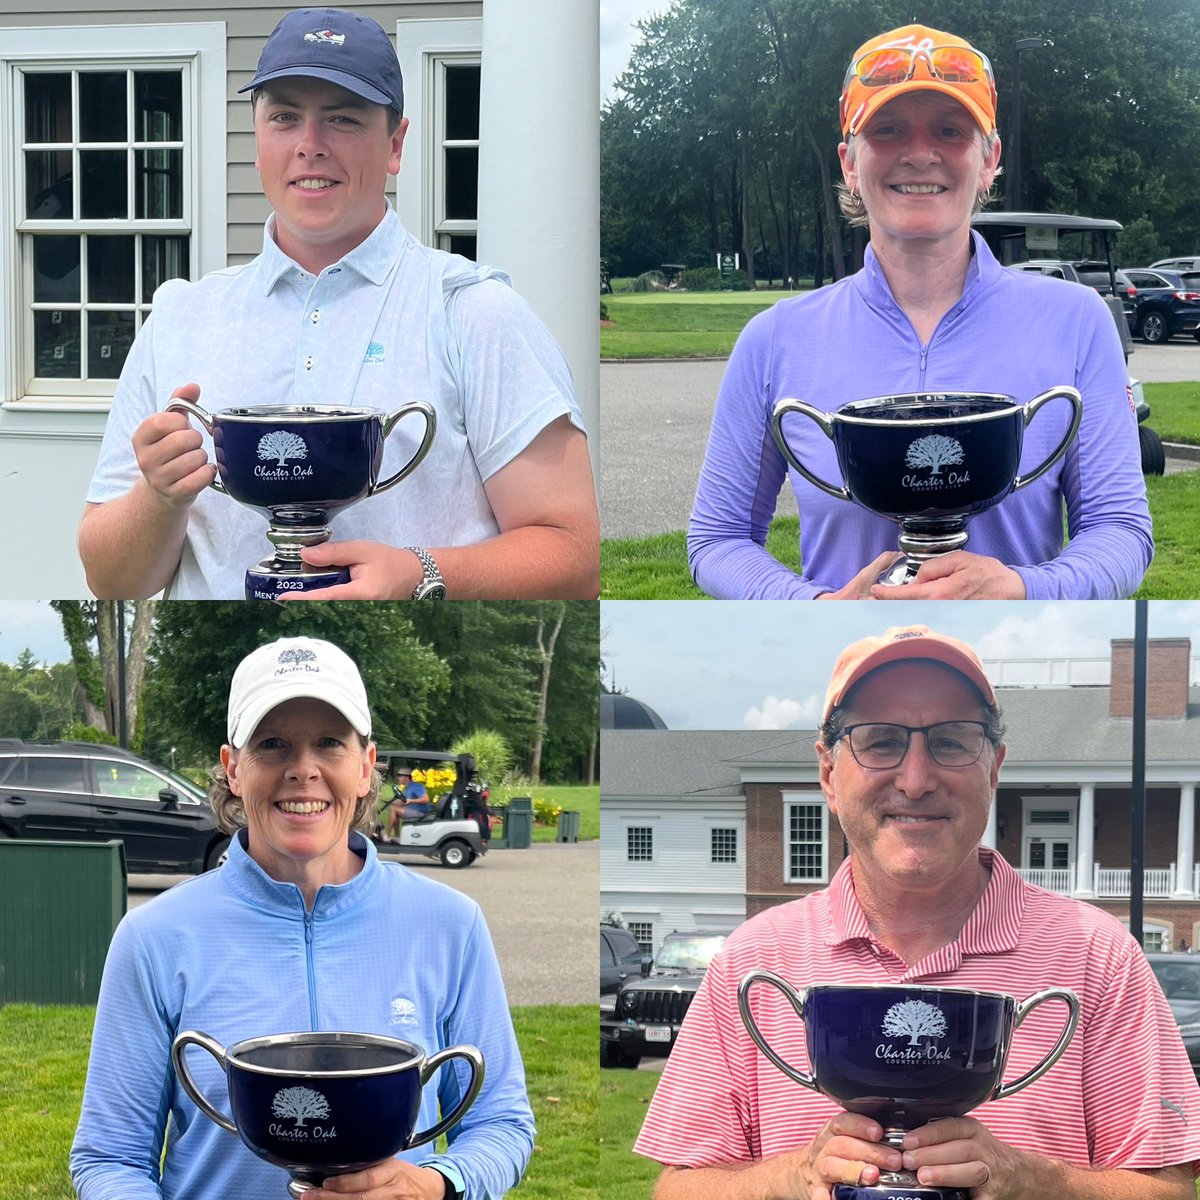 The Charter Oak Club Championship is in the record book. Congratulations to all the winners:
Men’s Gross Division: Matt Johnson
Men's Net Division: Mark Knasnow
Ladies Gross Divison: Julie Trask
Ladies Net Division: Wanda Lukehart #charteroakcc #clubchampionship